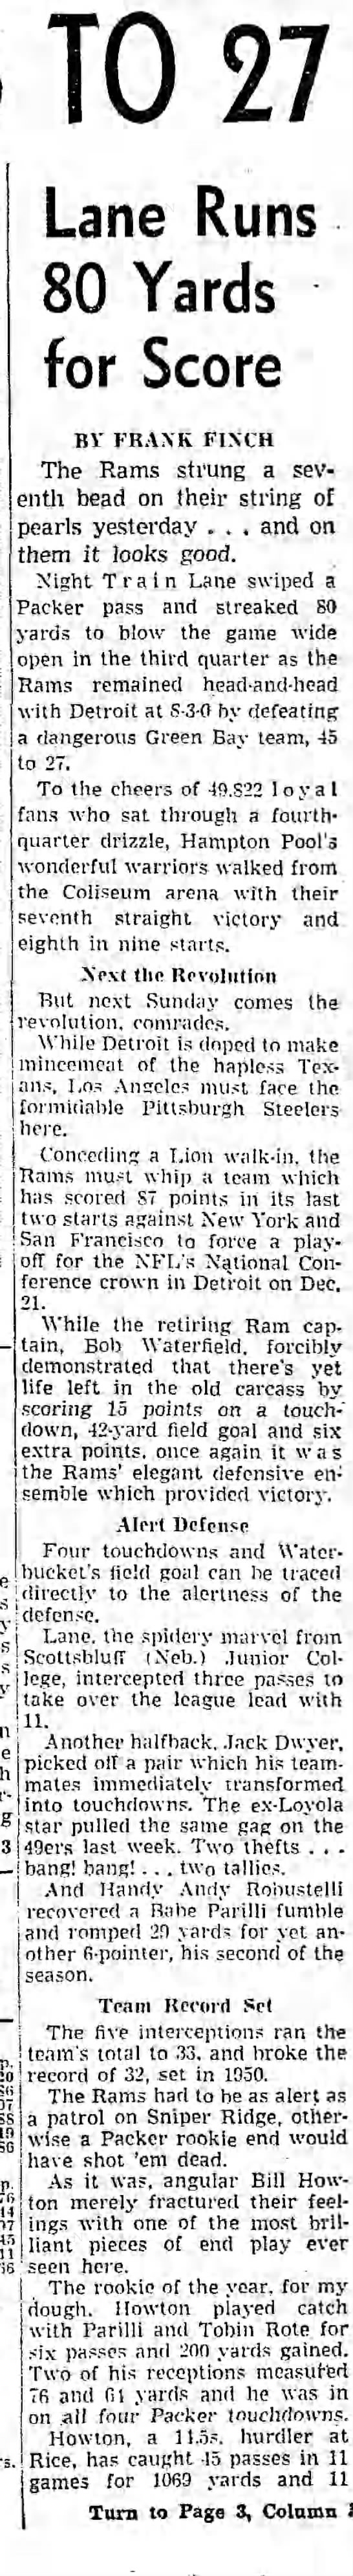 Rams Roar Over Packers, 45 to 27: Lane Runs 80 Yards for Score - 